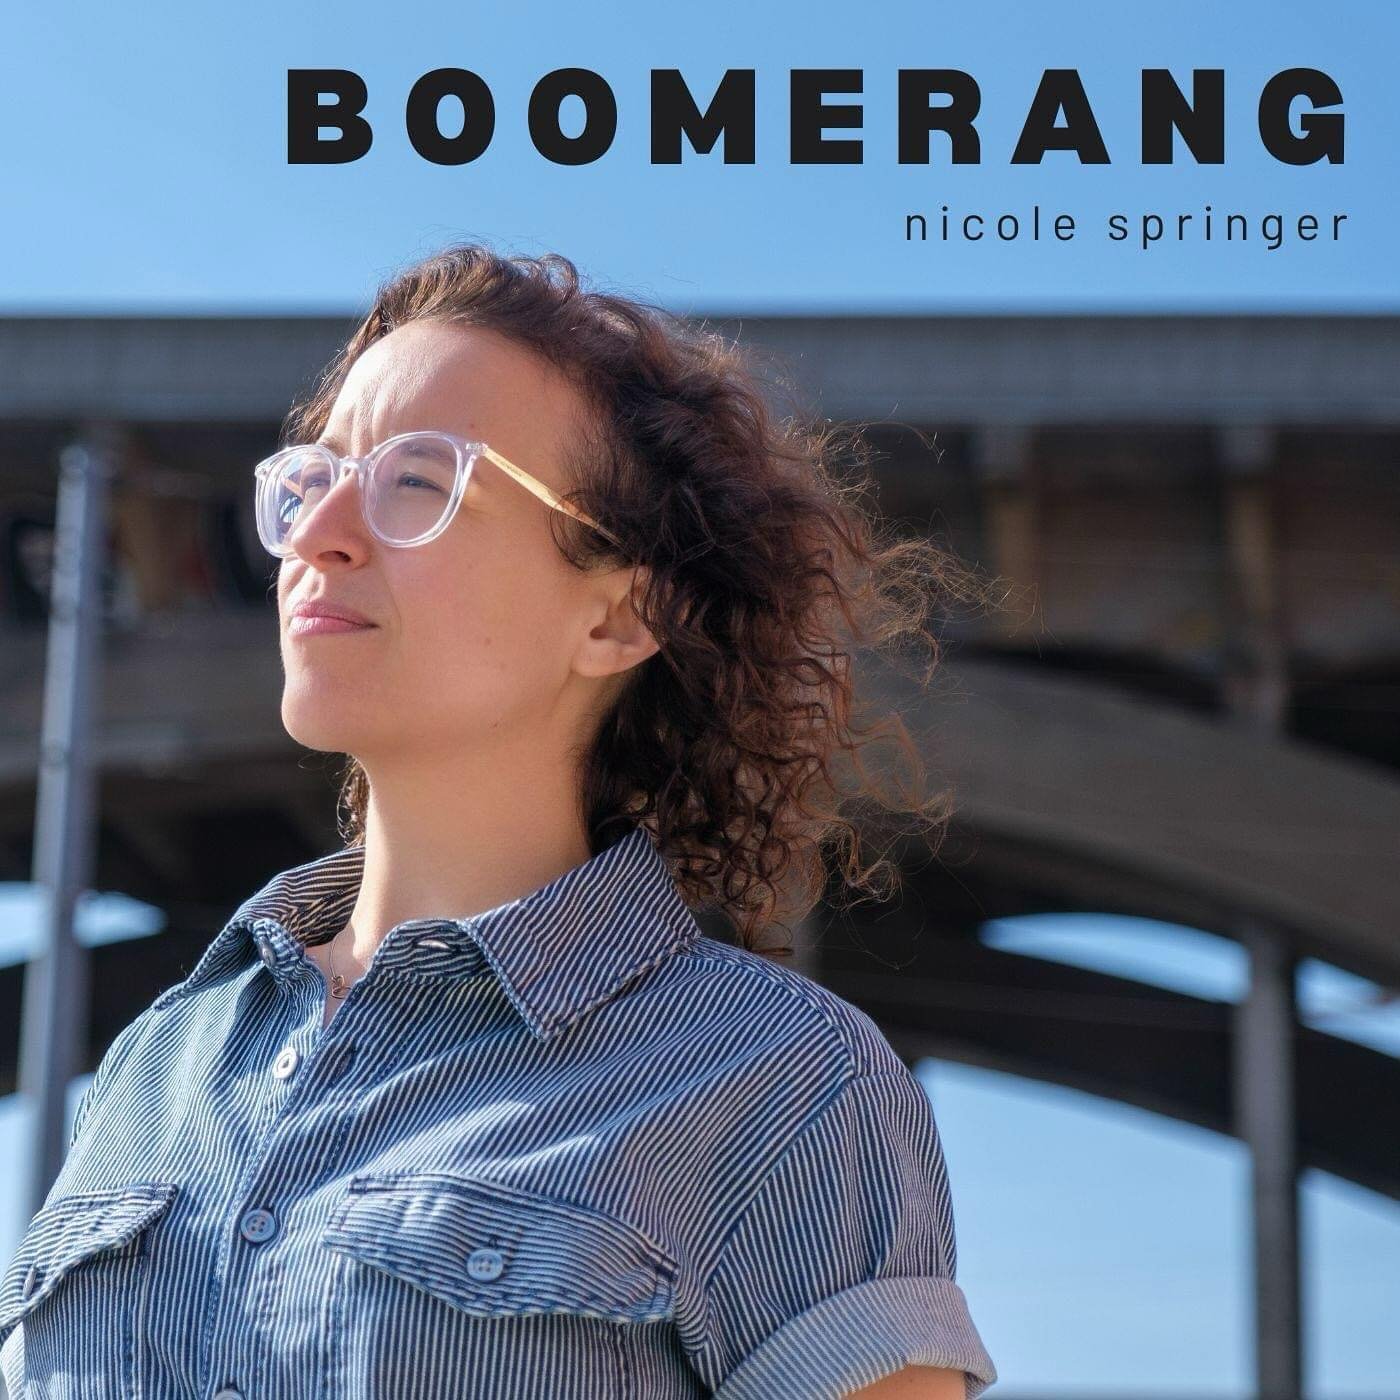 NEW MUSIC ANNOUNCEMENT! My brand new single - BOOMERANG - is coming to you all on 5/28! Recorded in sunny Los Angeles at @moosecatrecording, Boomerang is my anthem to finding freedom from toxic people performed with heart, soul, and 3 part harmony. 
